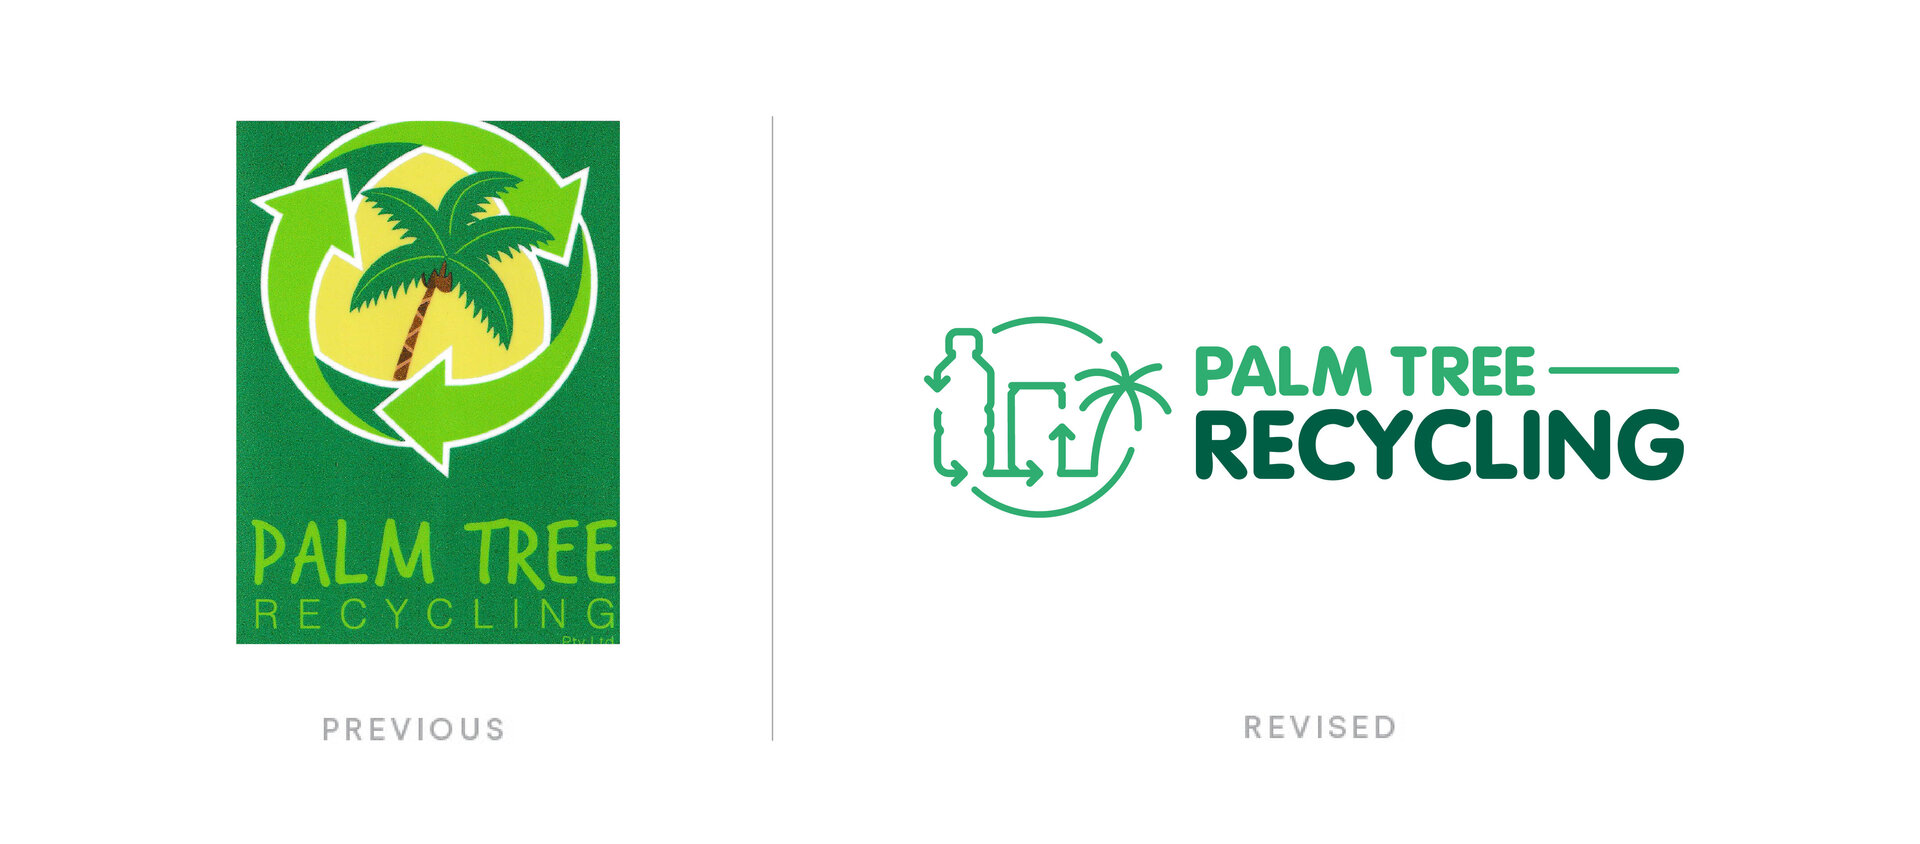 Palm Tree Recycling old and new logo design